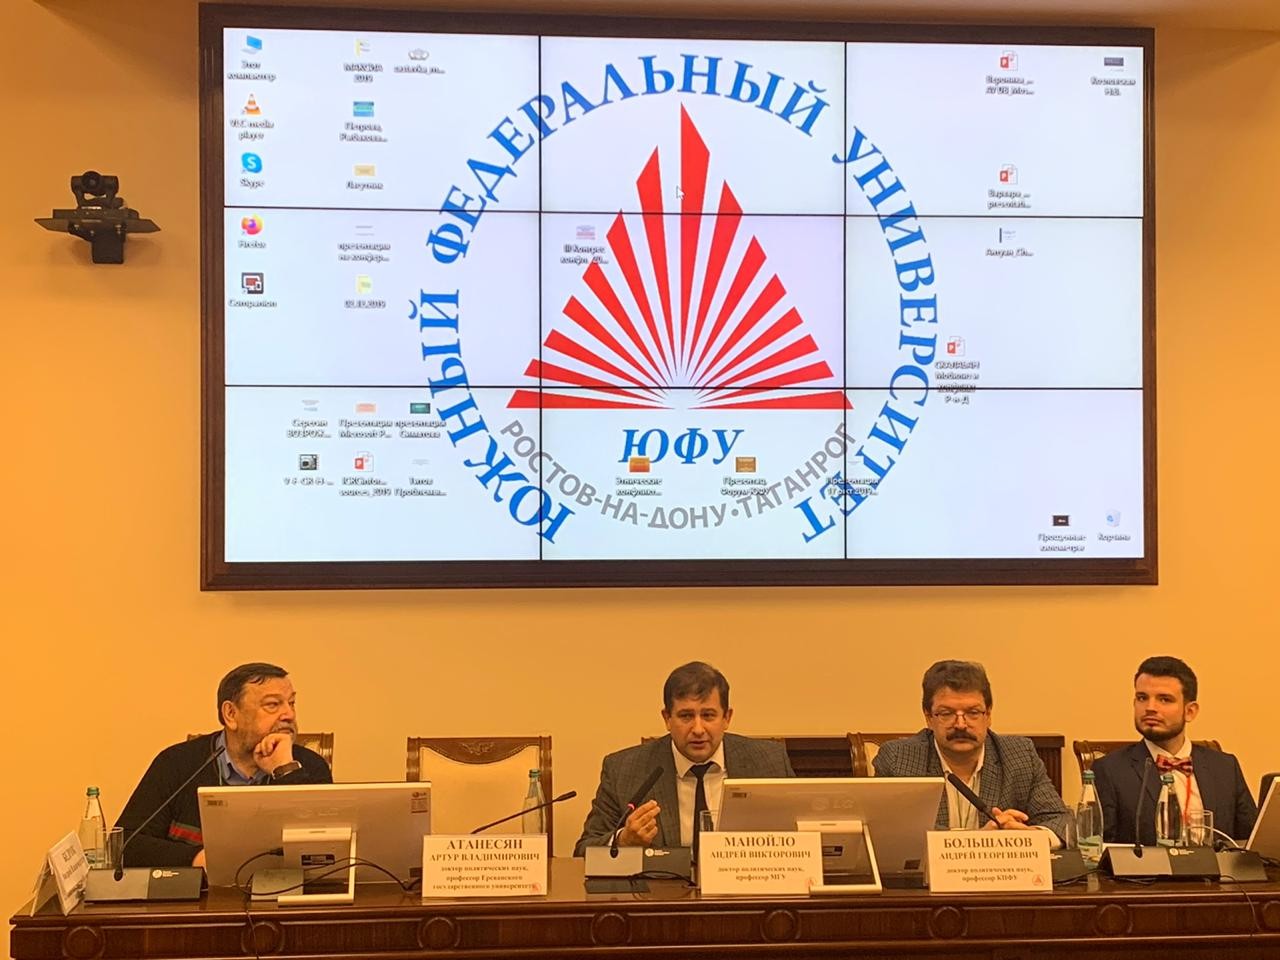 Professor Andrey Bolshakov becomes one the co-founders of the Russian Association of Conflictologists ,Russian Association of Conflictologists, Southern Federal University, Moscow State University